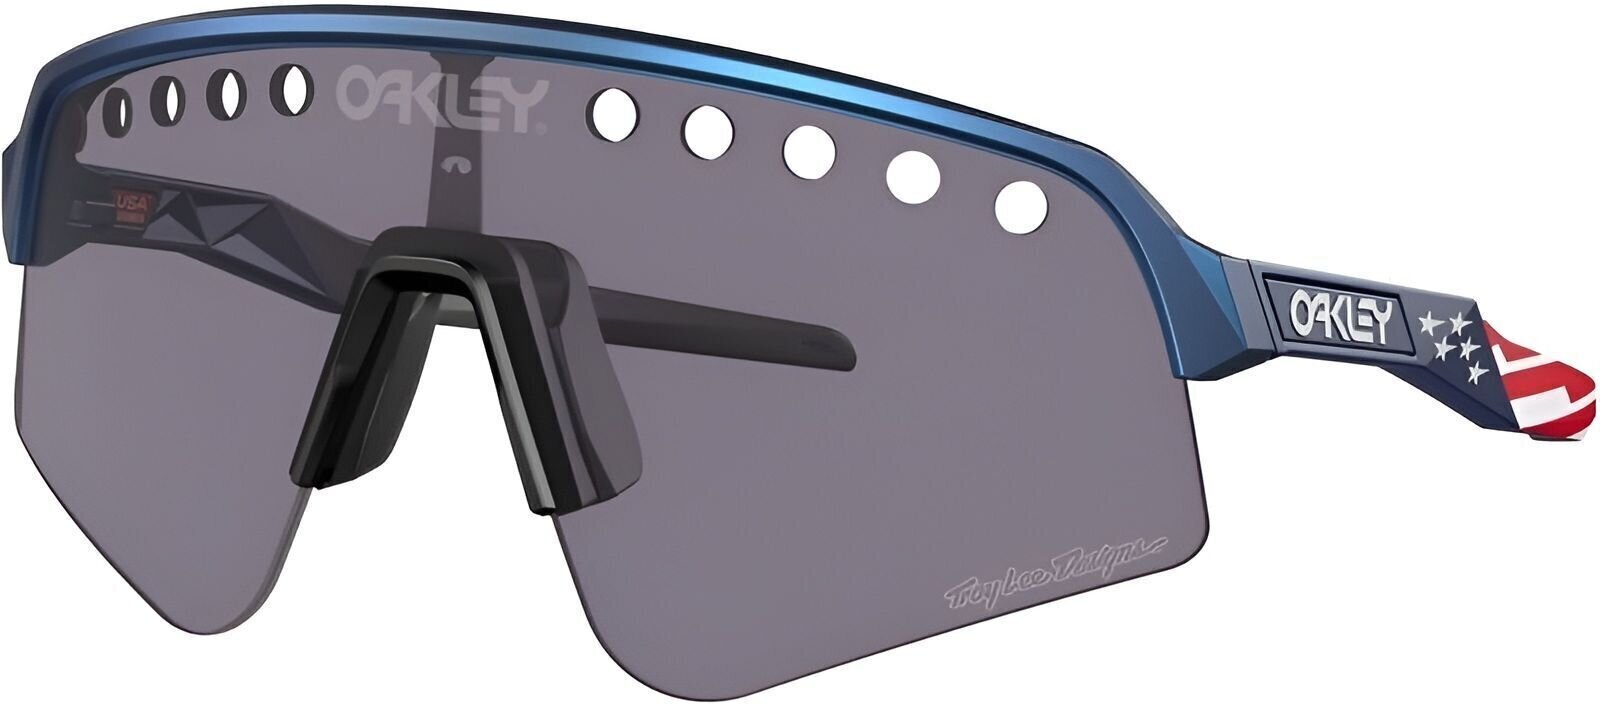 Cycling Glasses Oakley Sutro Lite Sweep 94650439 Tld Blue Colorshift/Prizm Grey Cycling Glasses